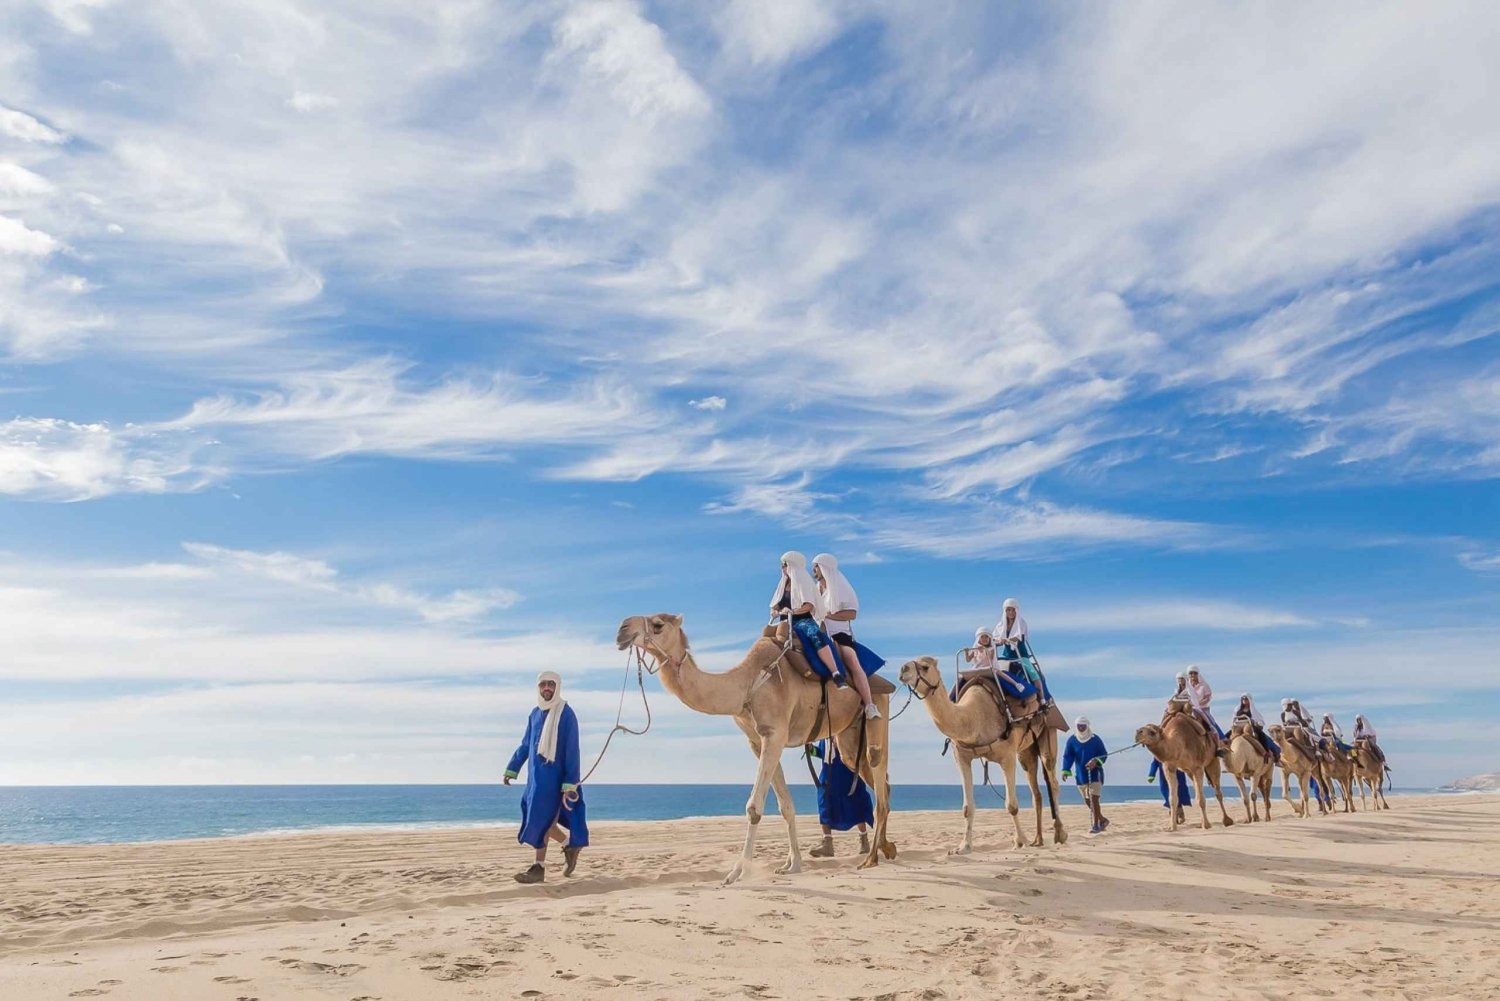 Cabo San Lucas: Camel Safari Tour with Lunch and Tequila